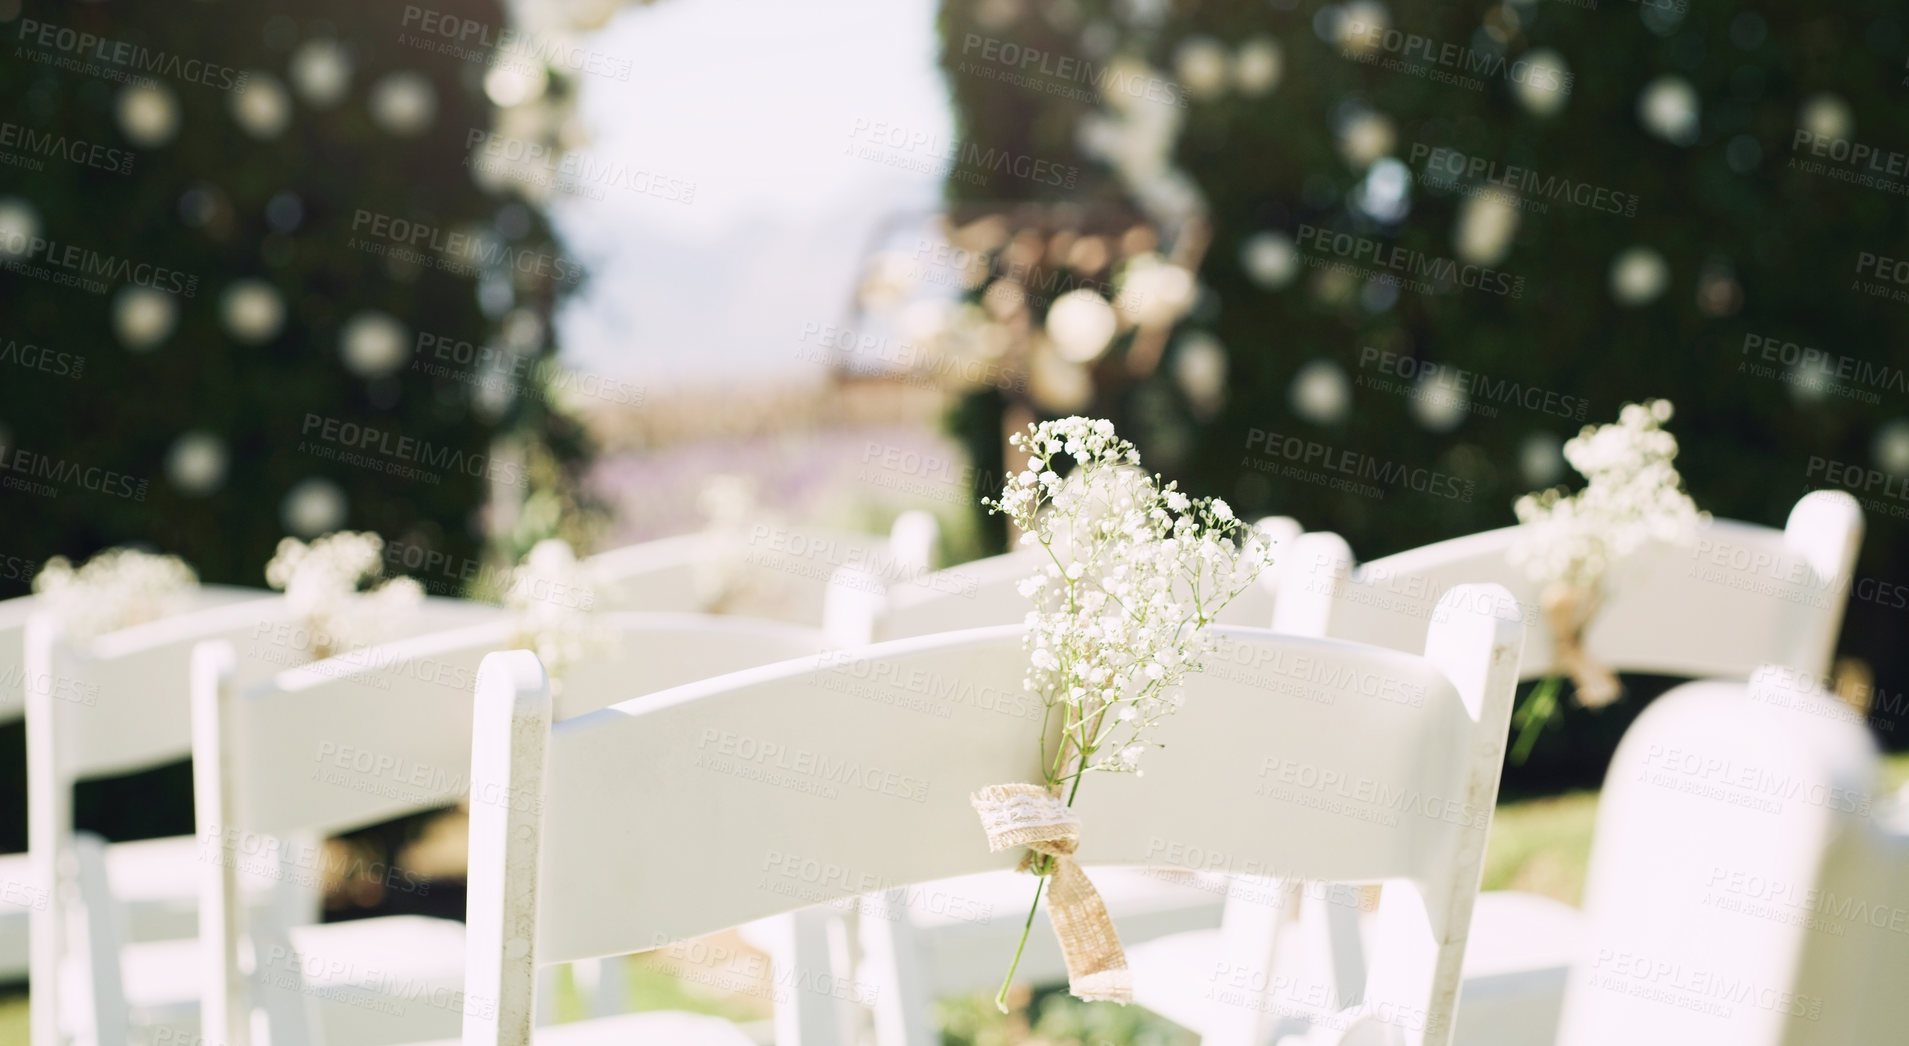 Buy stock photo Still life sot of arranged chairs at an empty wedding venue during the day